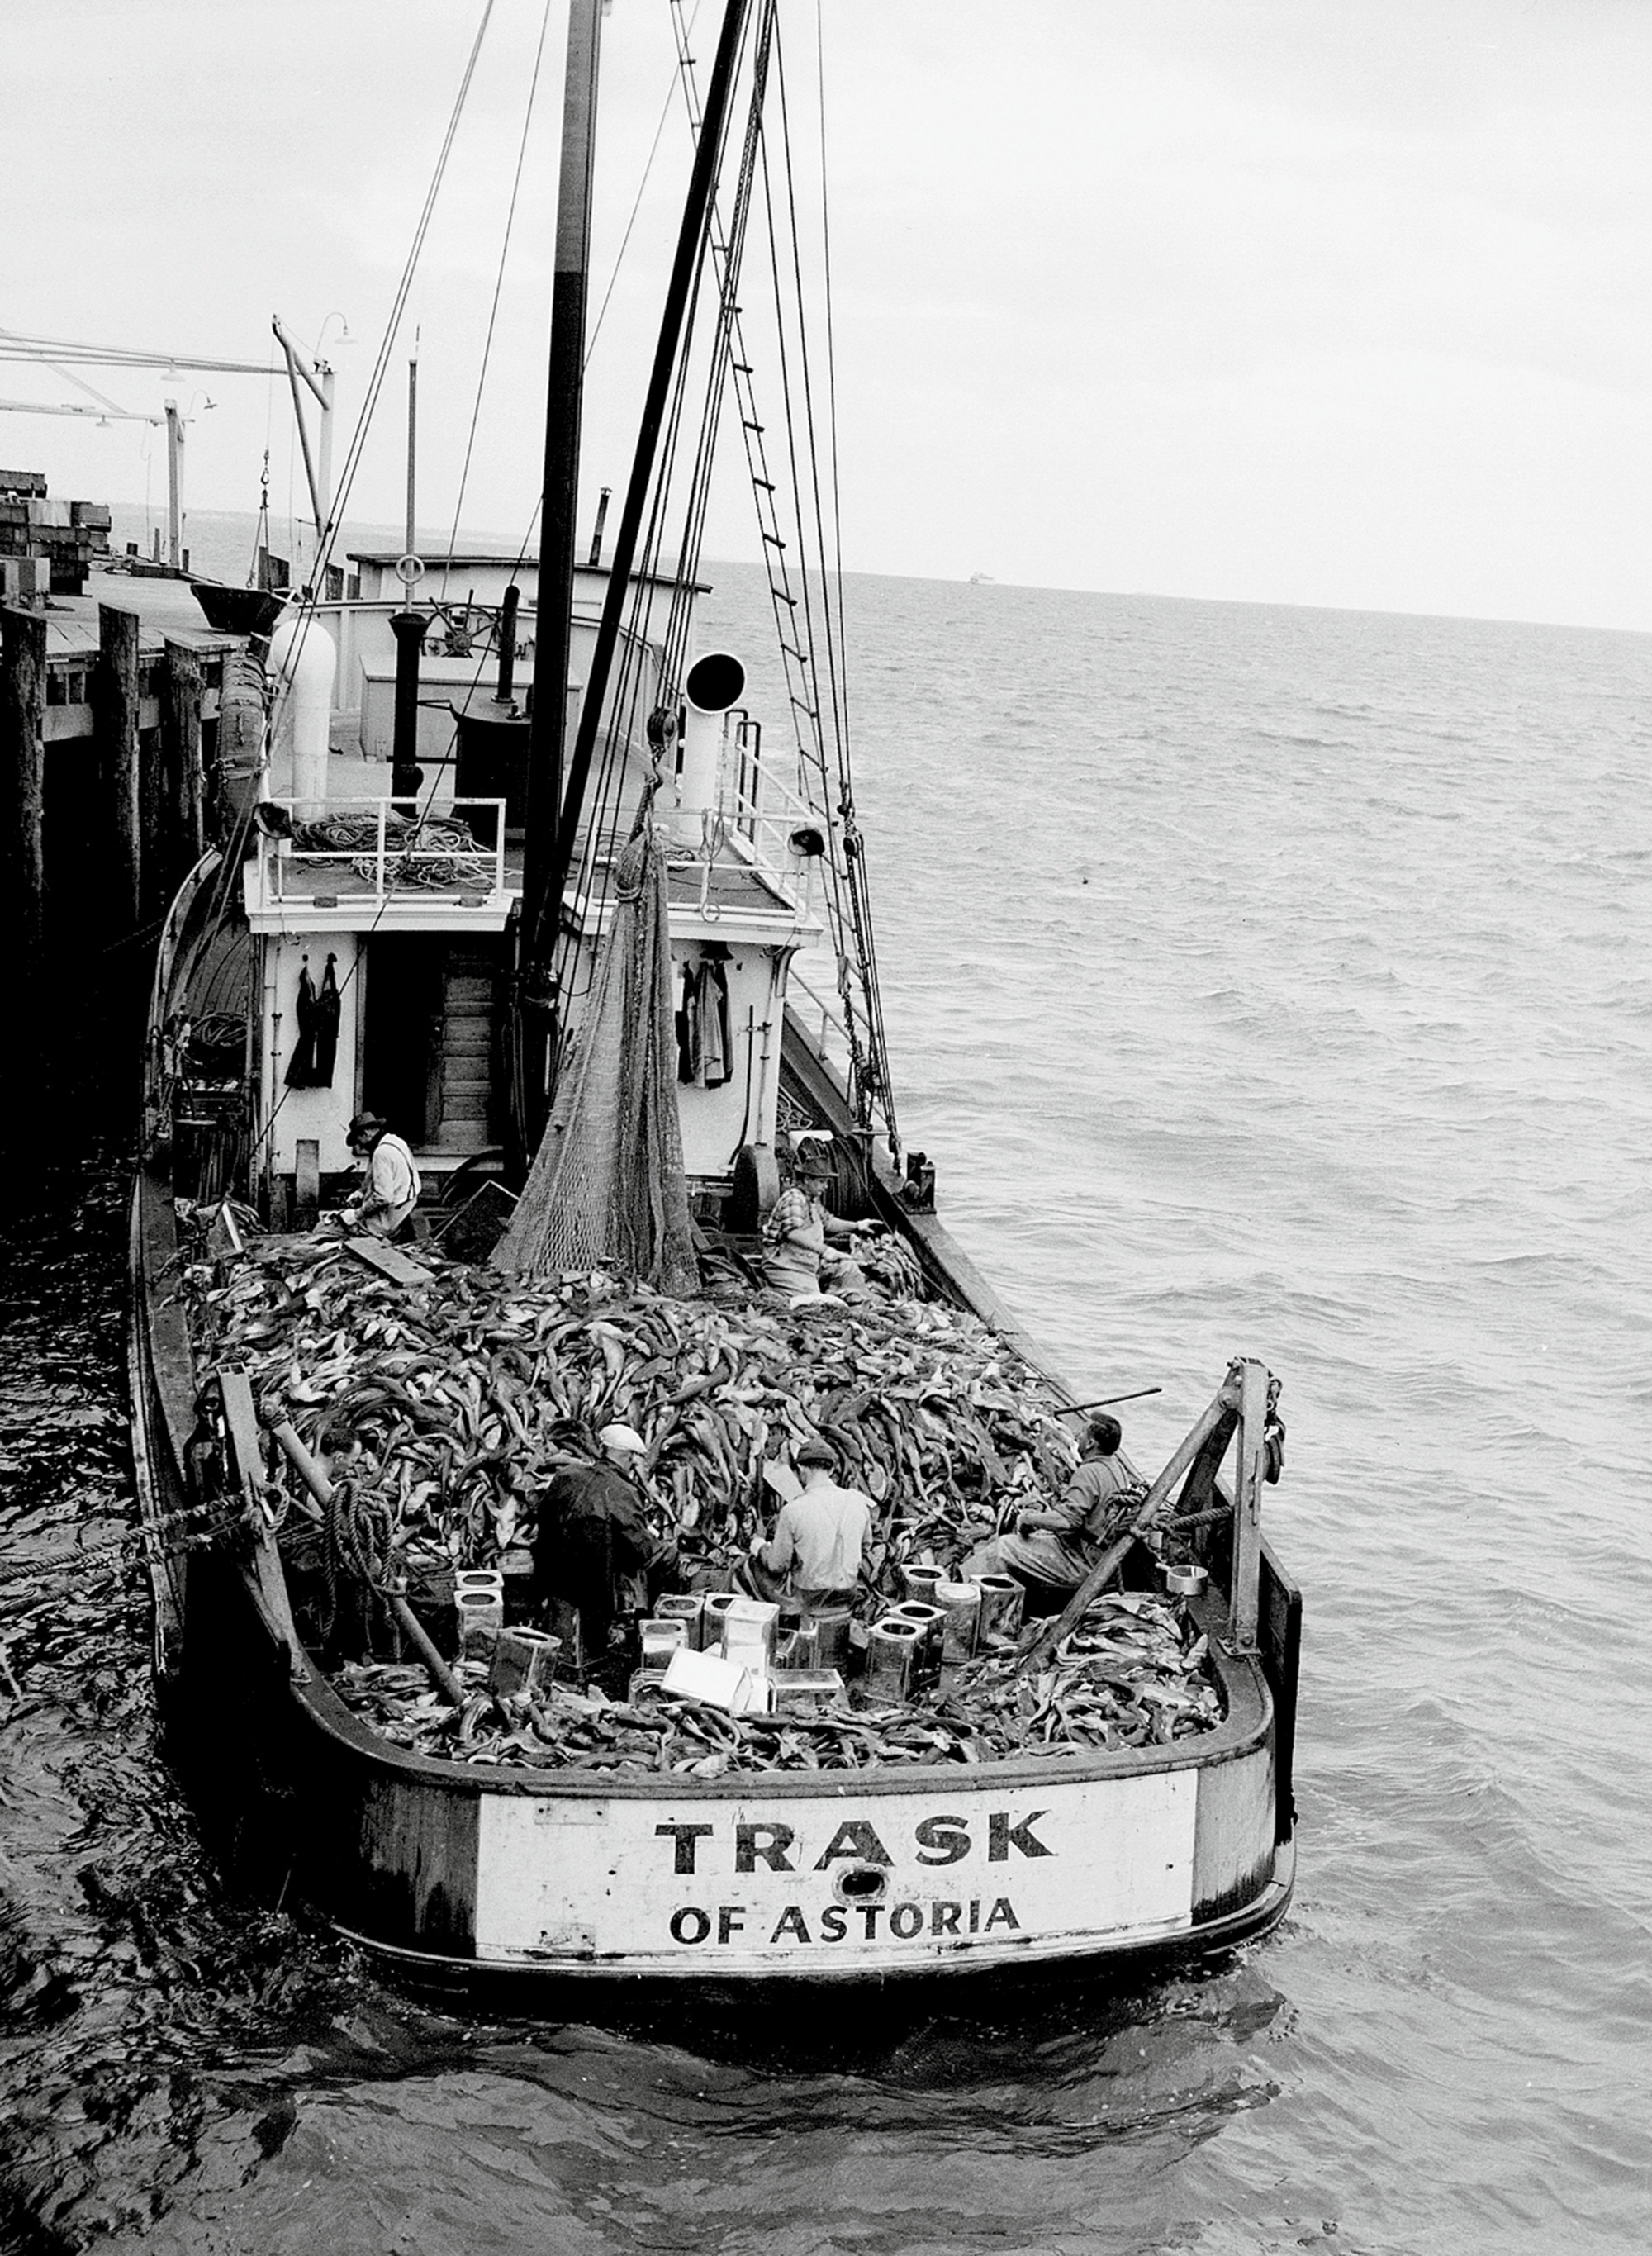 A nineteen forty-eight photograph of George Moskovita and his crew with a haul of soupfin sharks aboard the Trask of Astoria in Astoria, Oregon.